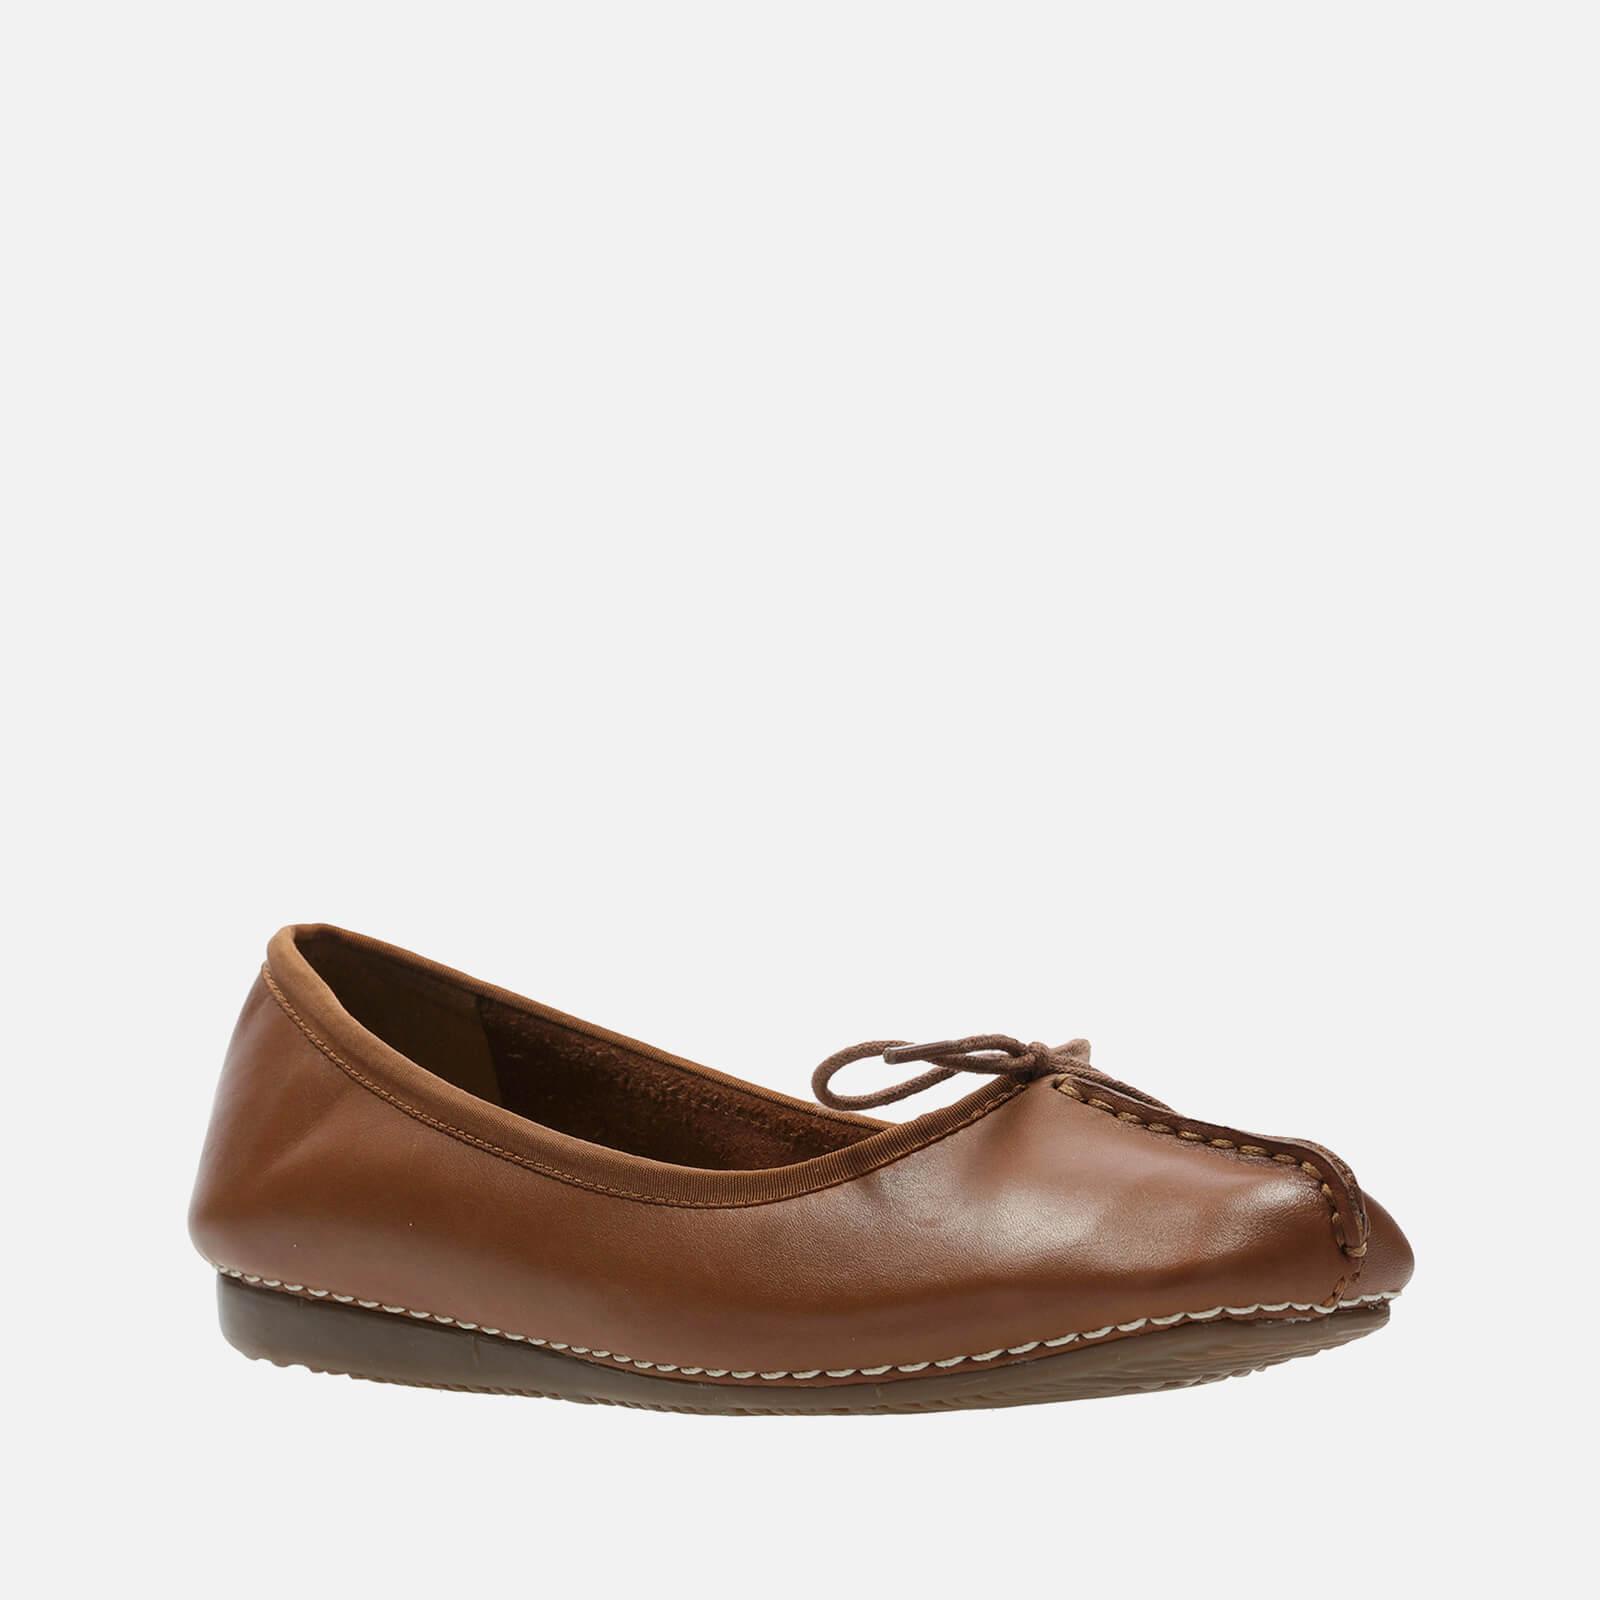 Clarks Freckle Ice Leather Ballet Flats in Tan (Brown) | Lyst